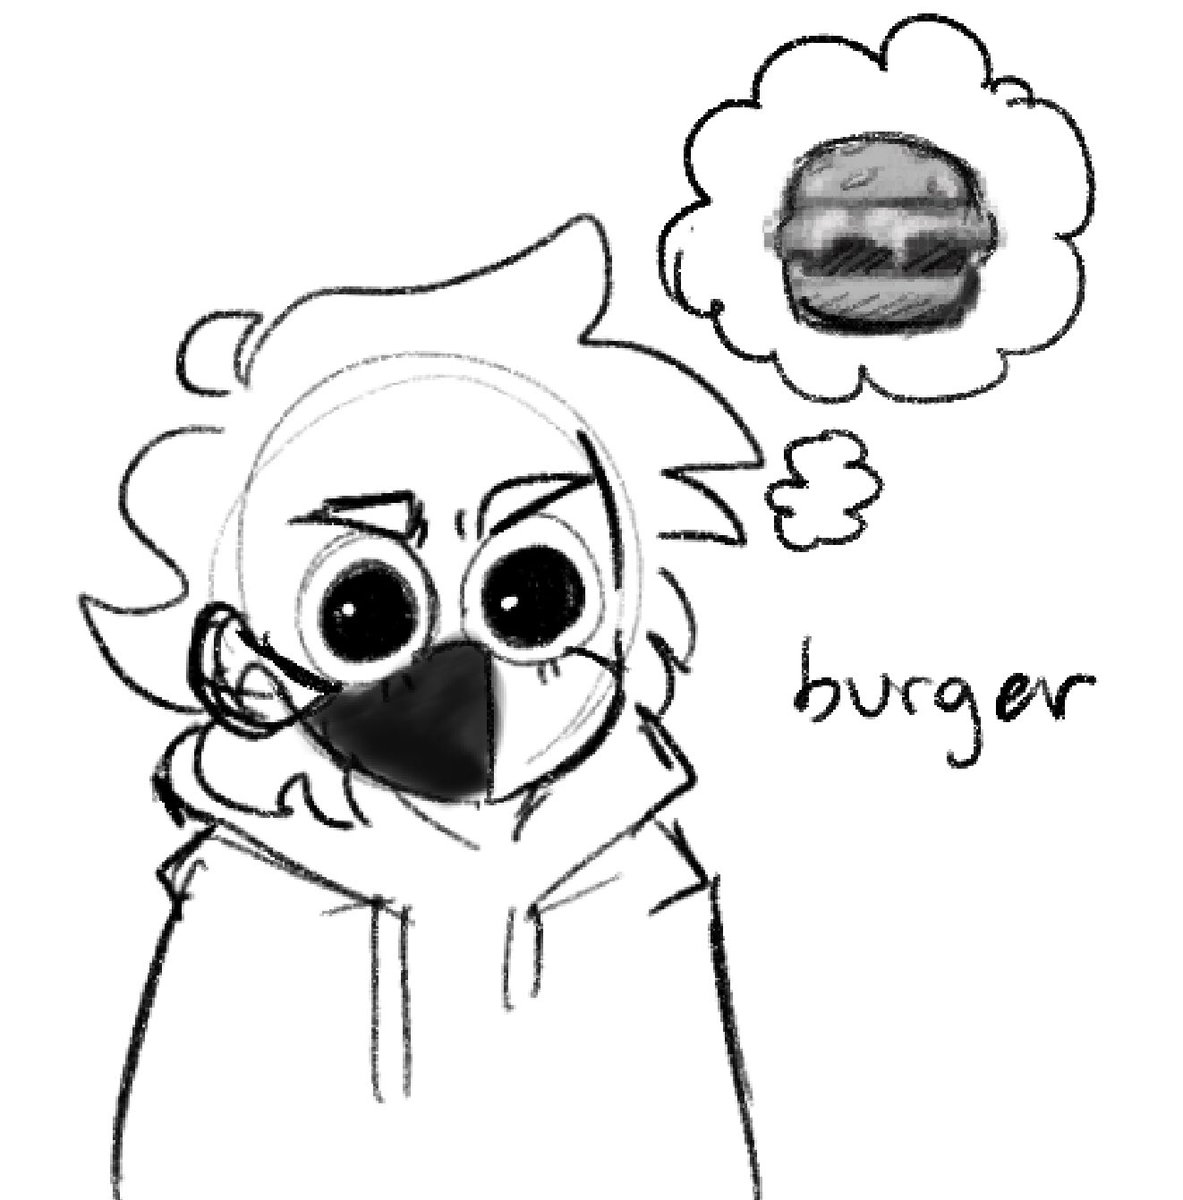 im slowly falling into obscurity but burger 